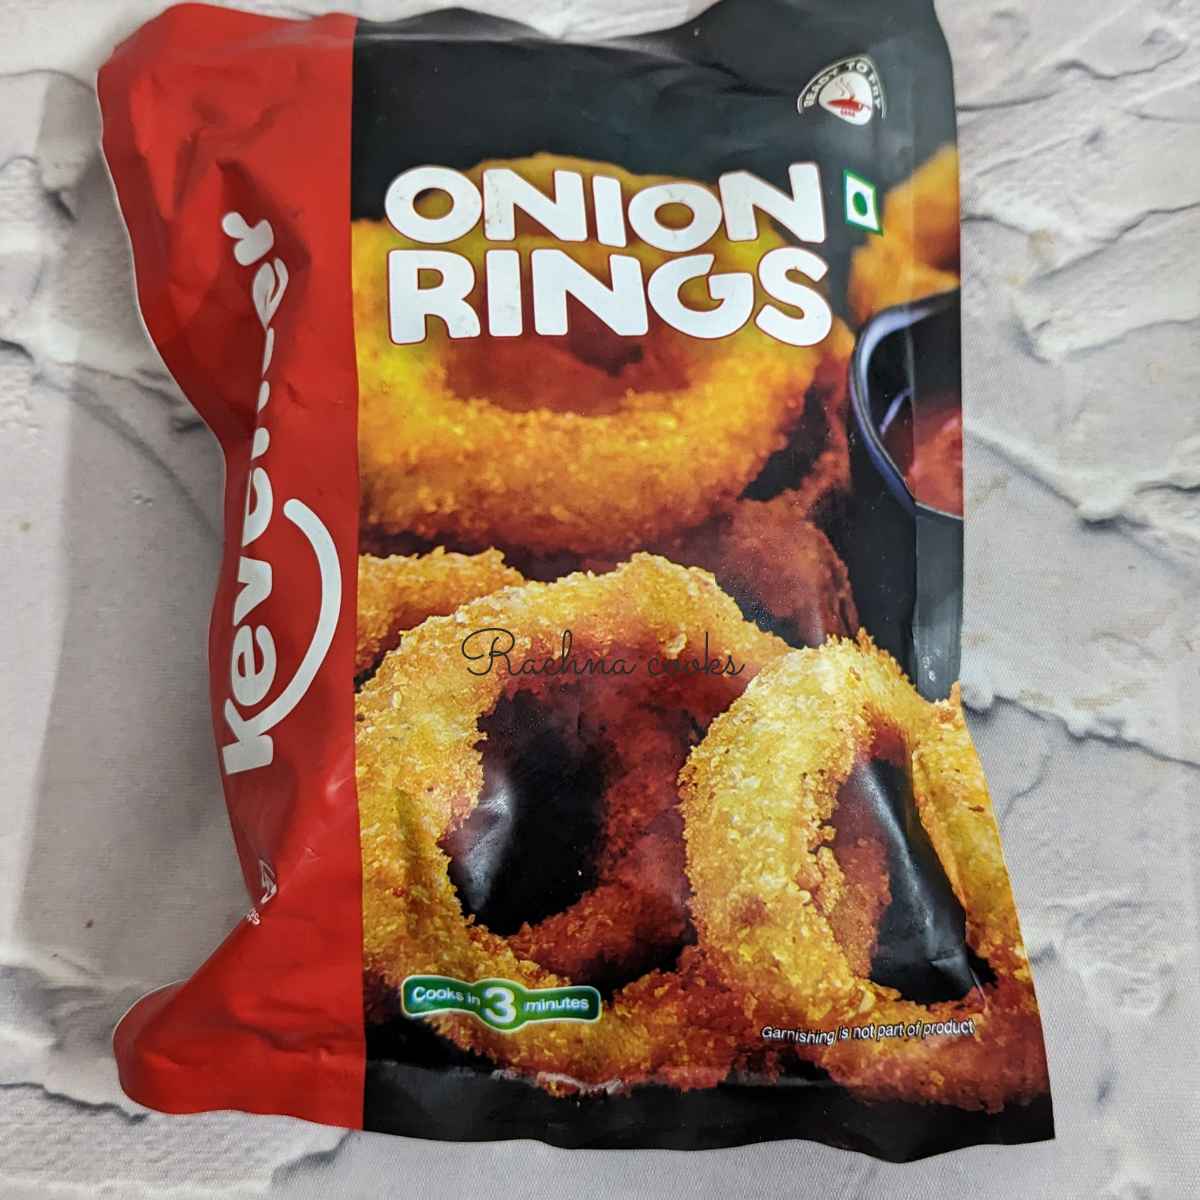 Pack of frozen onion rings